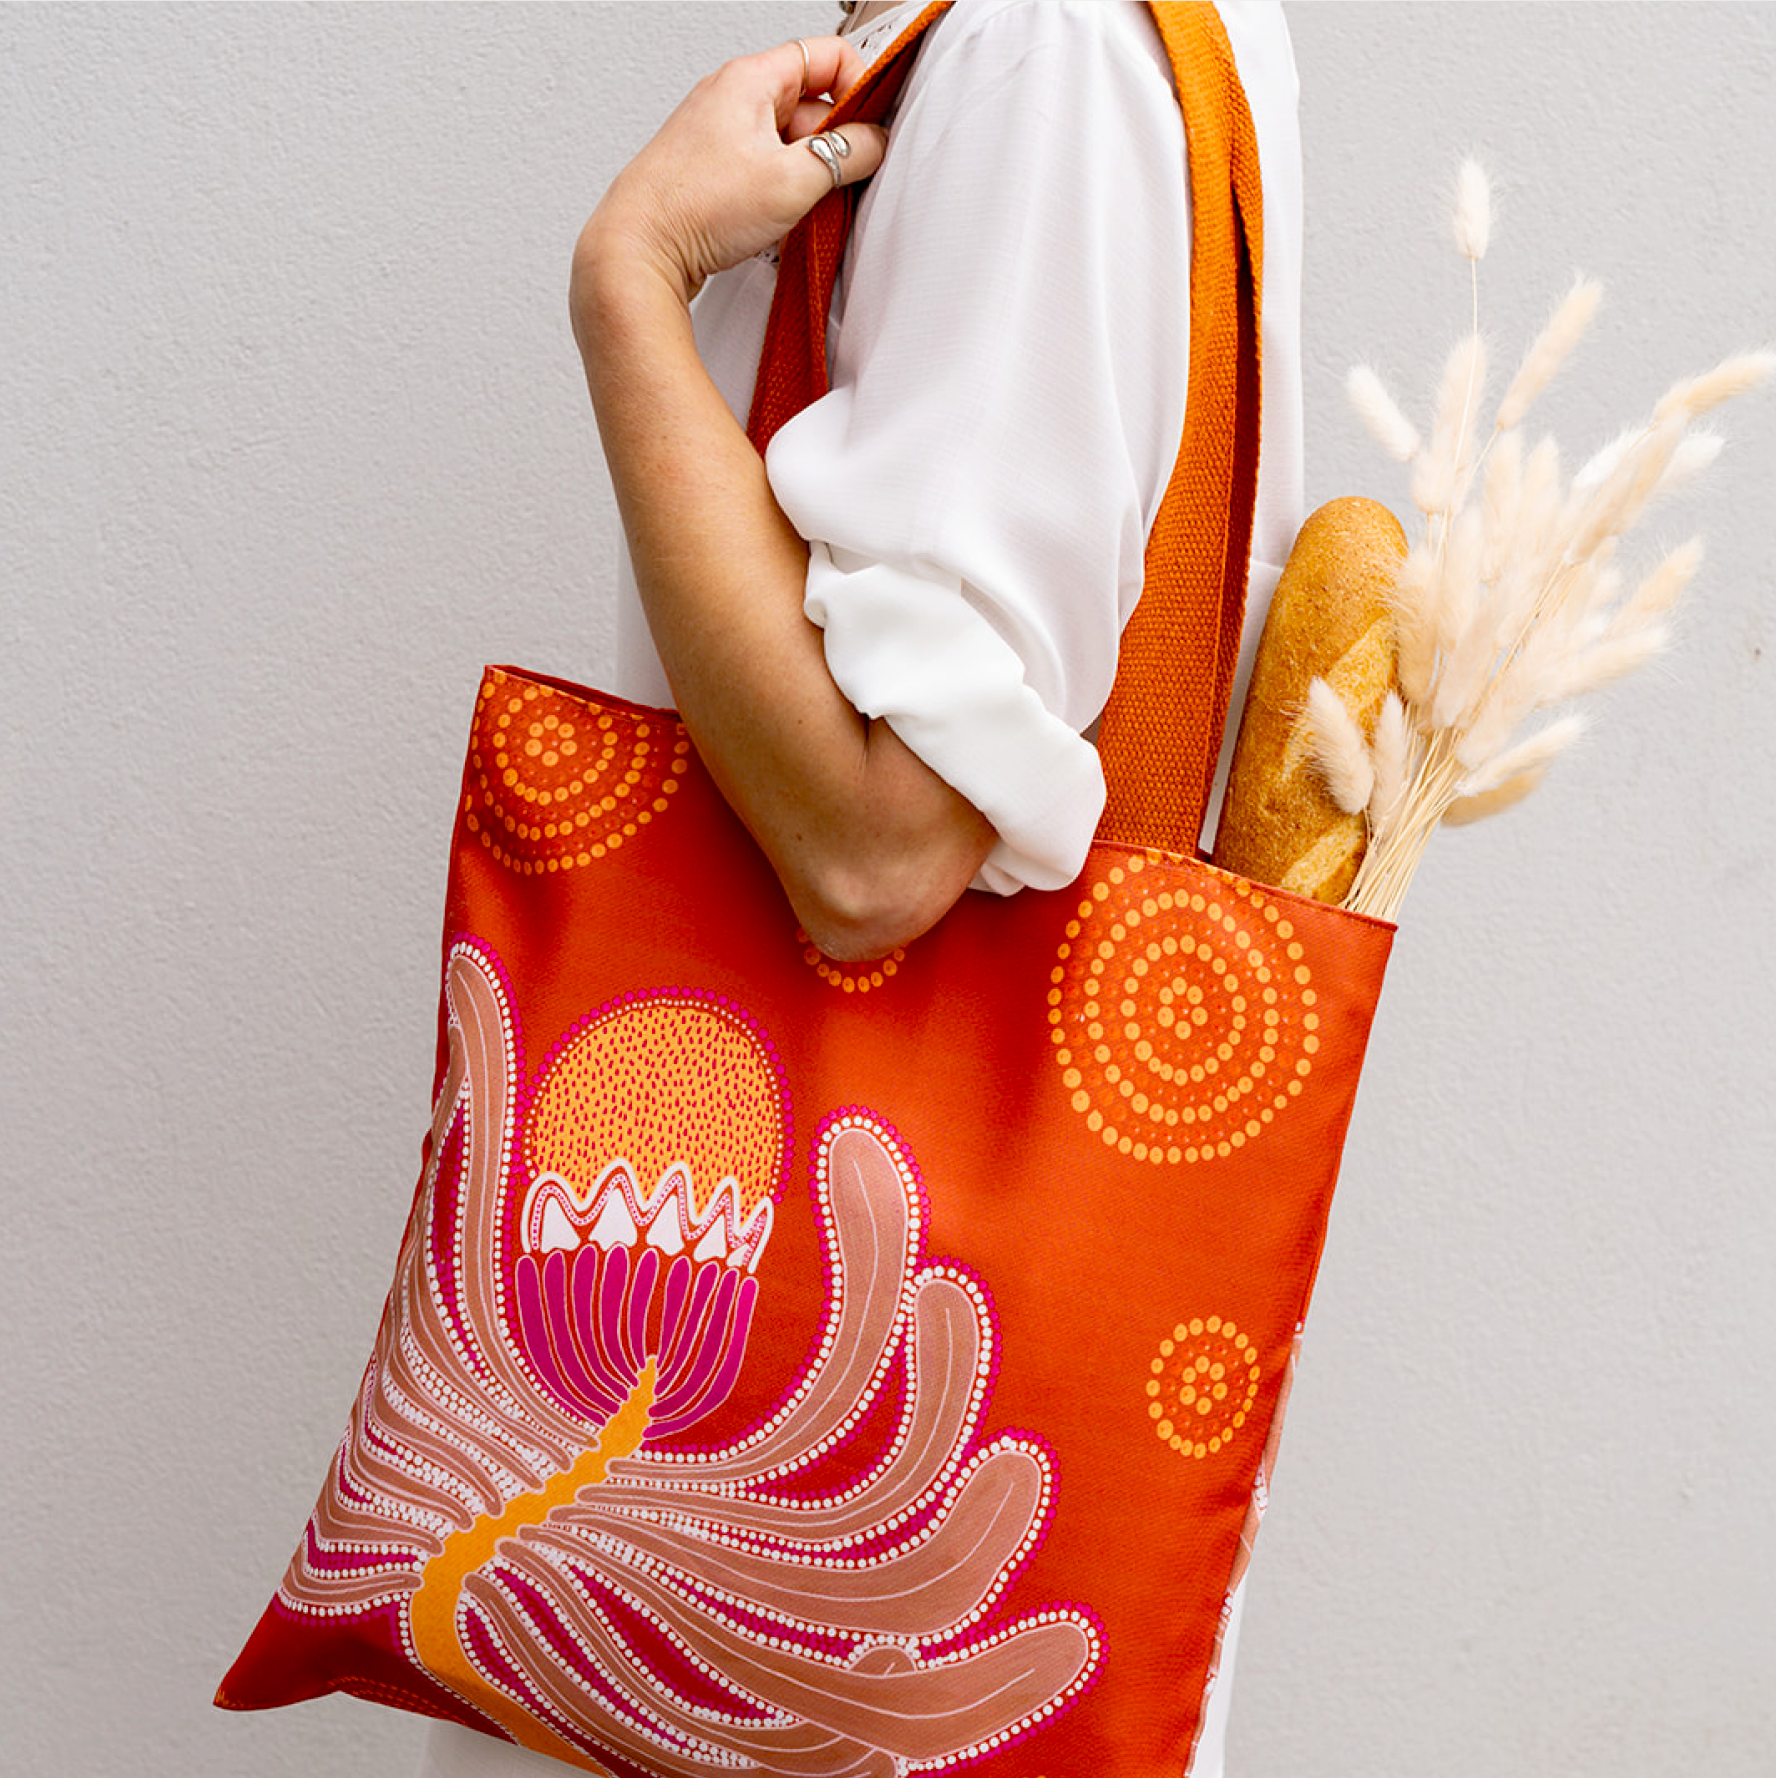 BANKSIA TOTE BAG - AUSTRALIAN MOTHERS DAY GIFTS BY DOMICA HILL